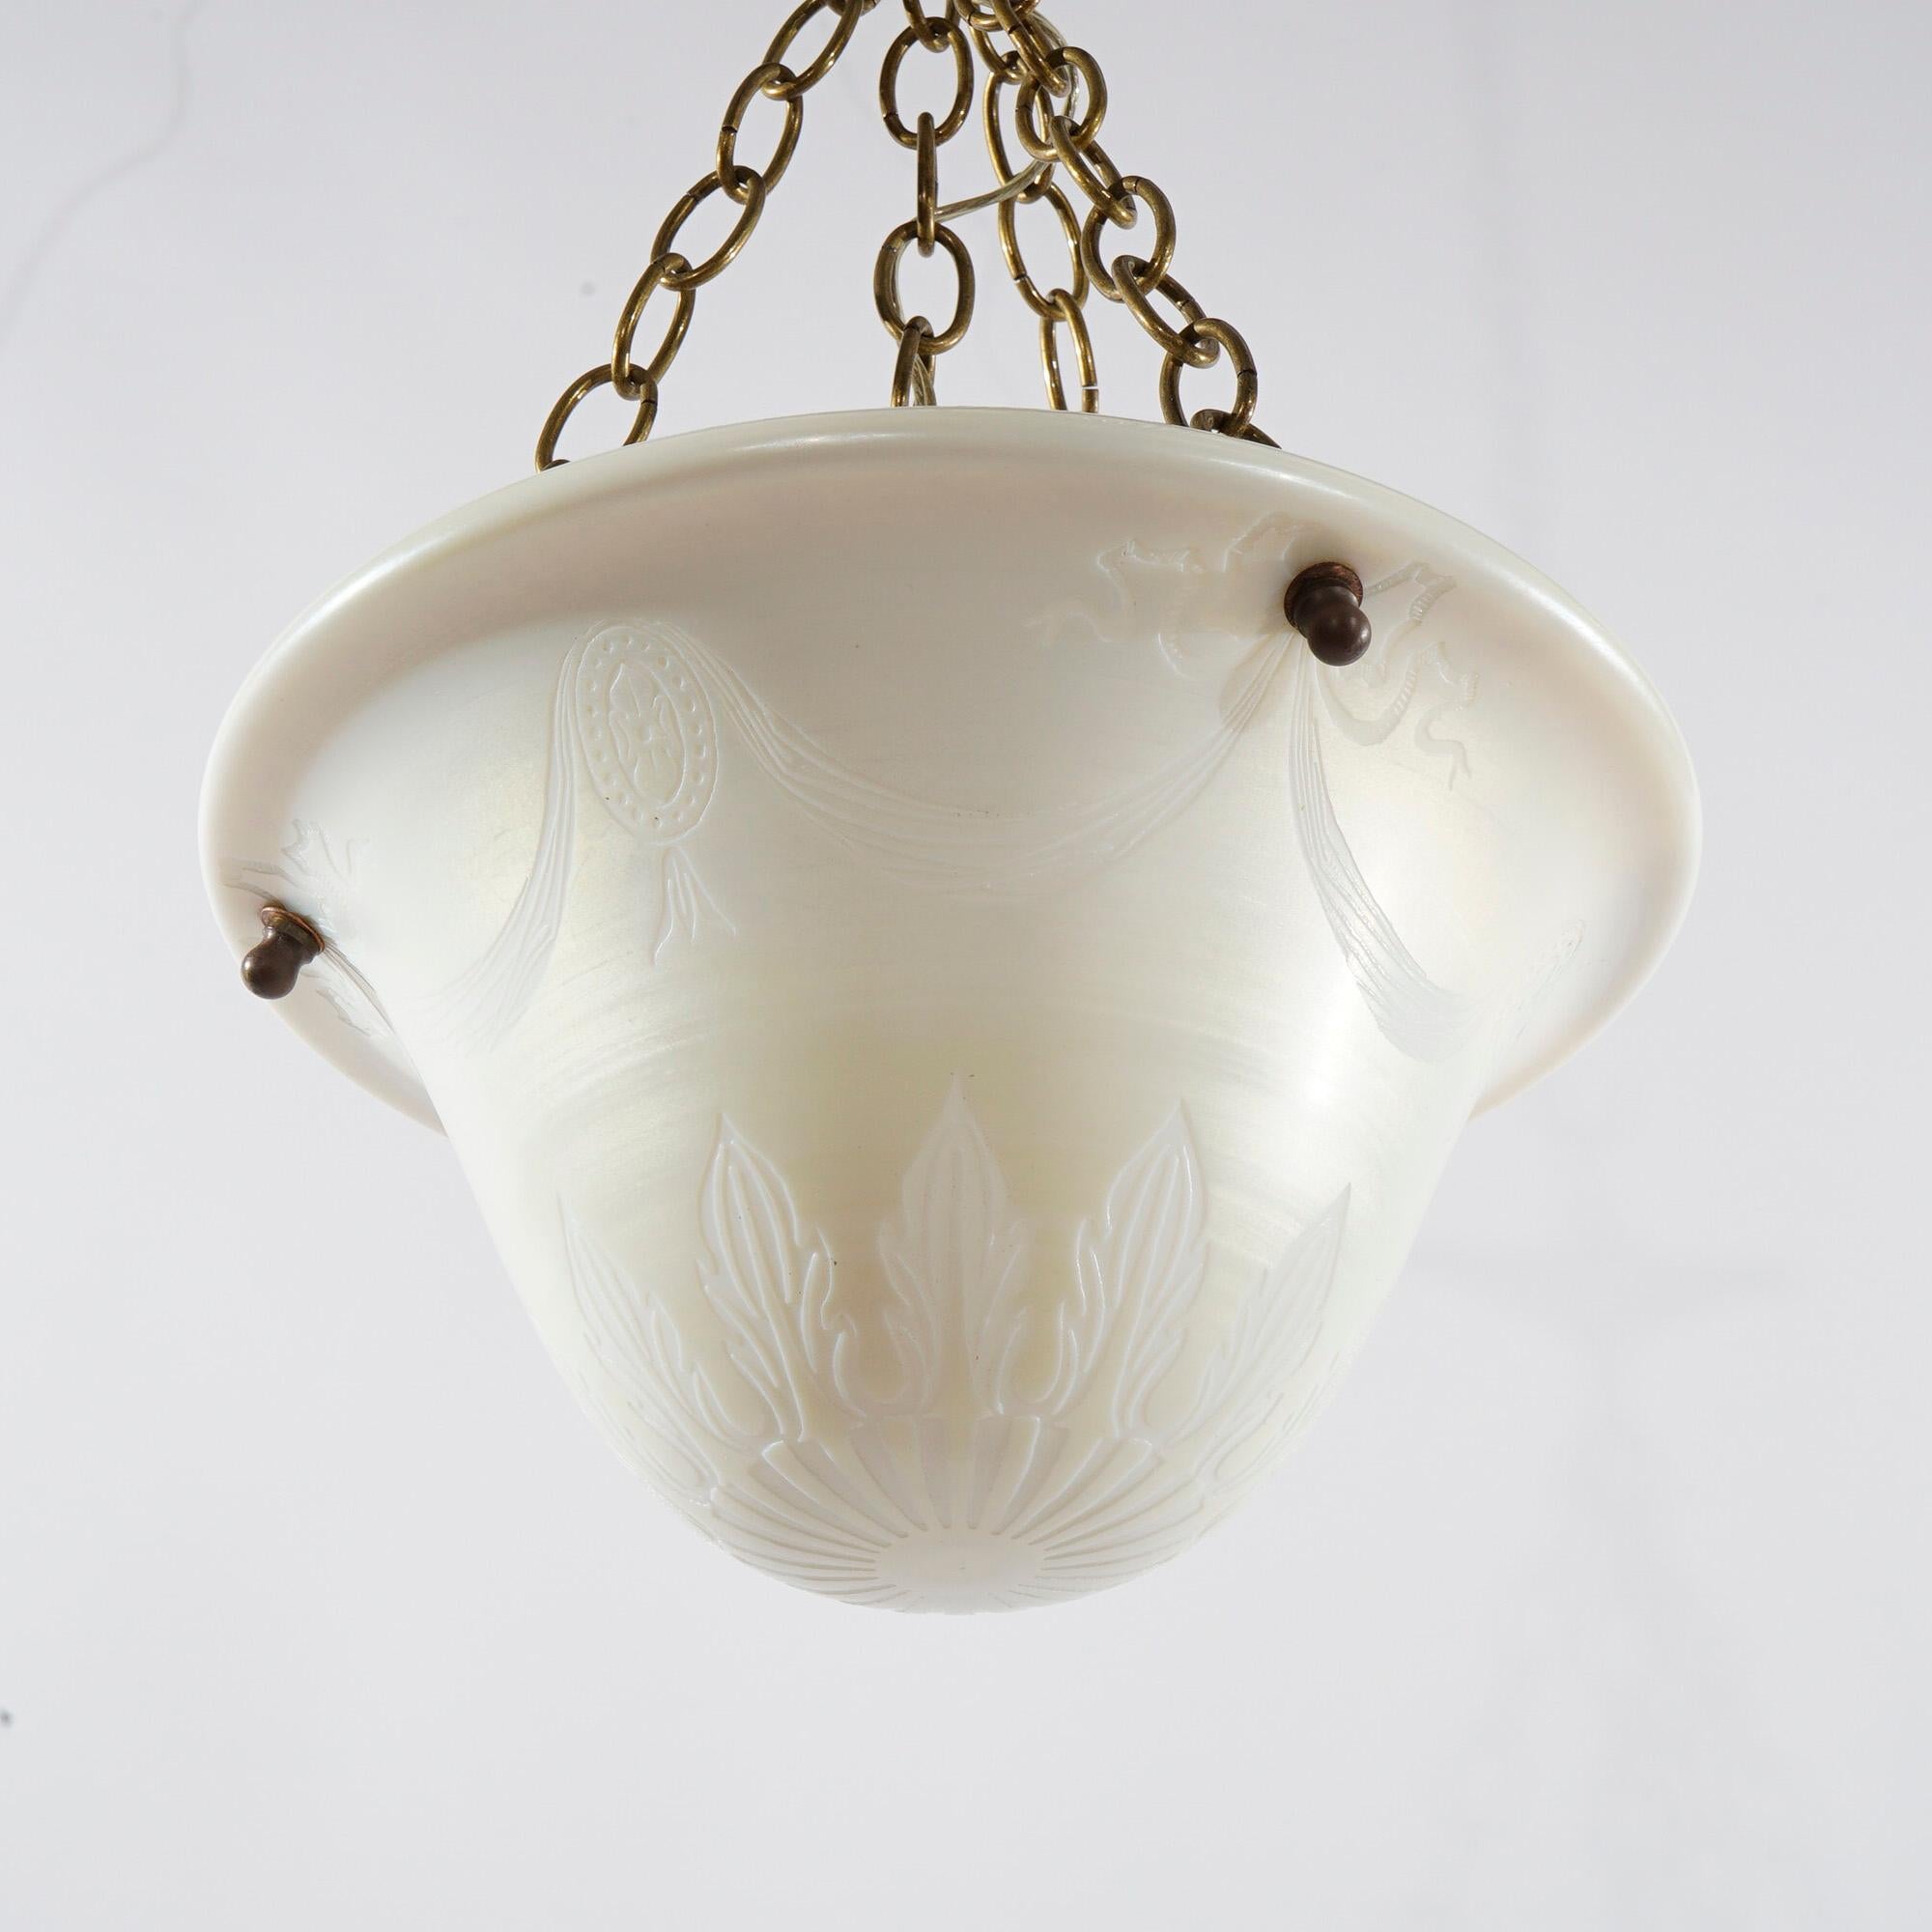 An antique pendant light offers single socket light with drop pendant having art glass calcite etched shade with swag and foliate design, c1920

Measures- 20'' H x 11.75'' W x 11.75'' D; 7'' drop.